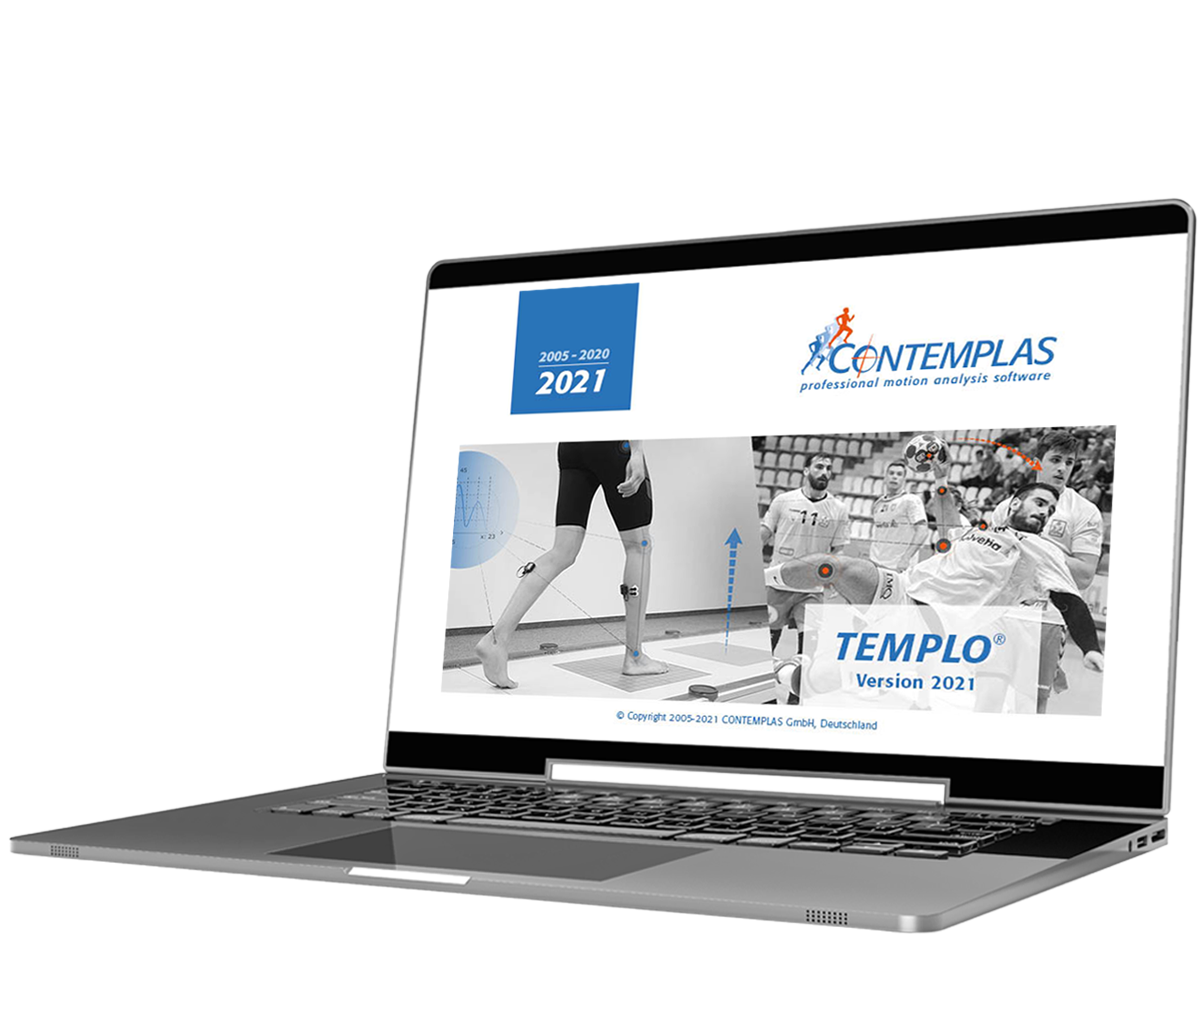 TEMPLO® Analysis Software   Most advanced video technology for 2D and 3D